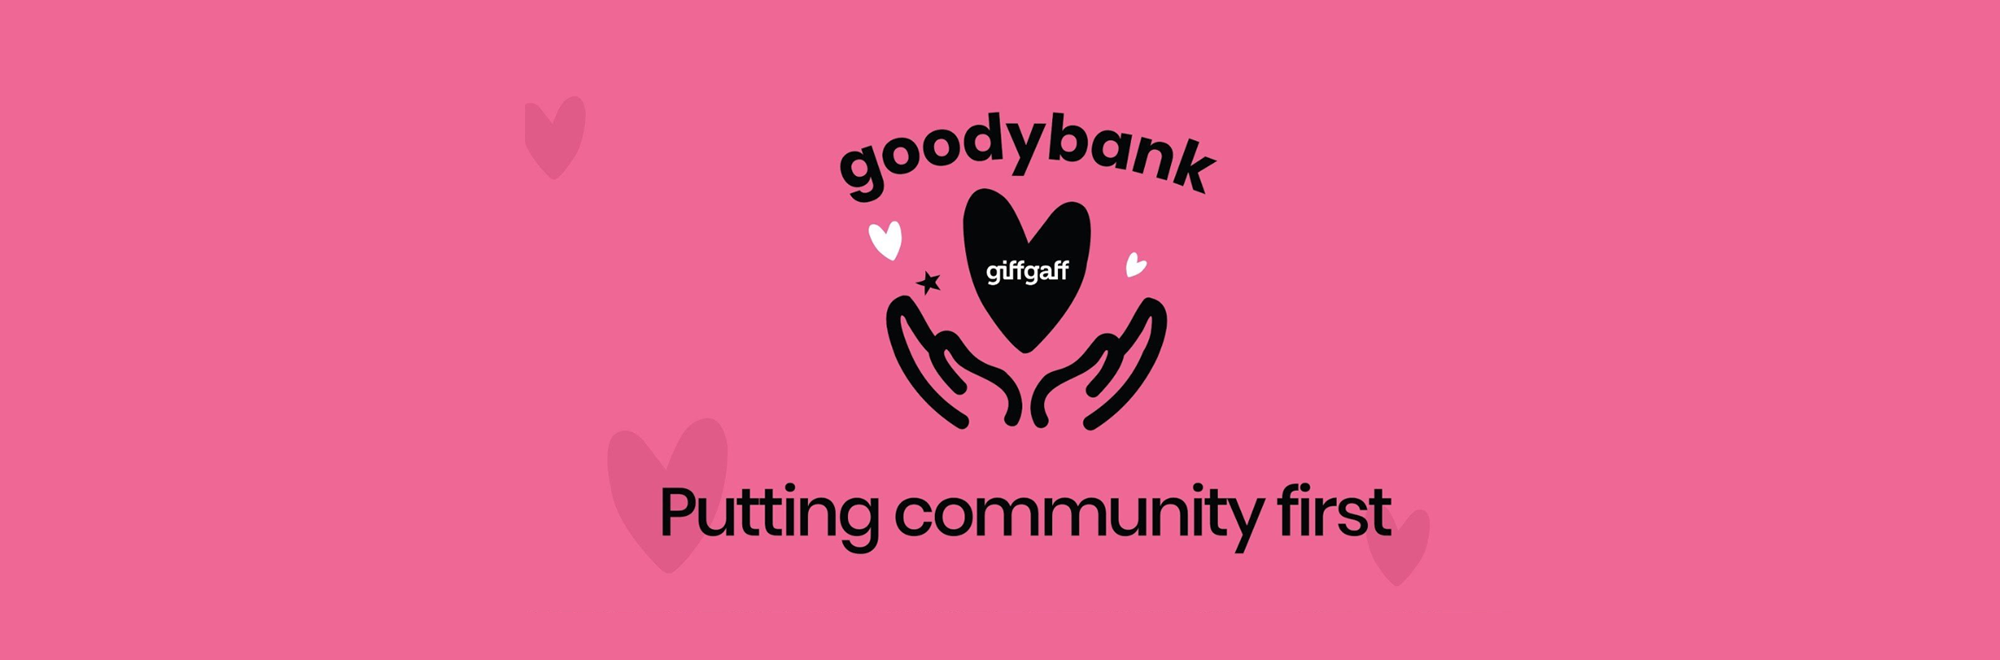 giffgaff launches ‘goodybank’ in response to COVID-19 crisis